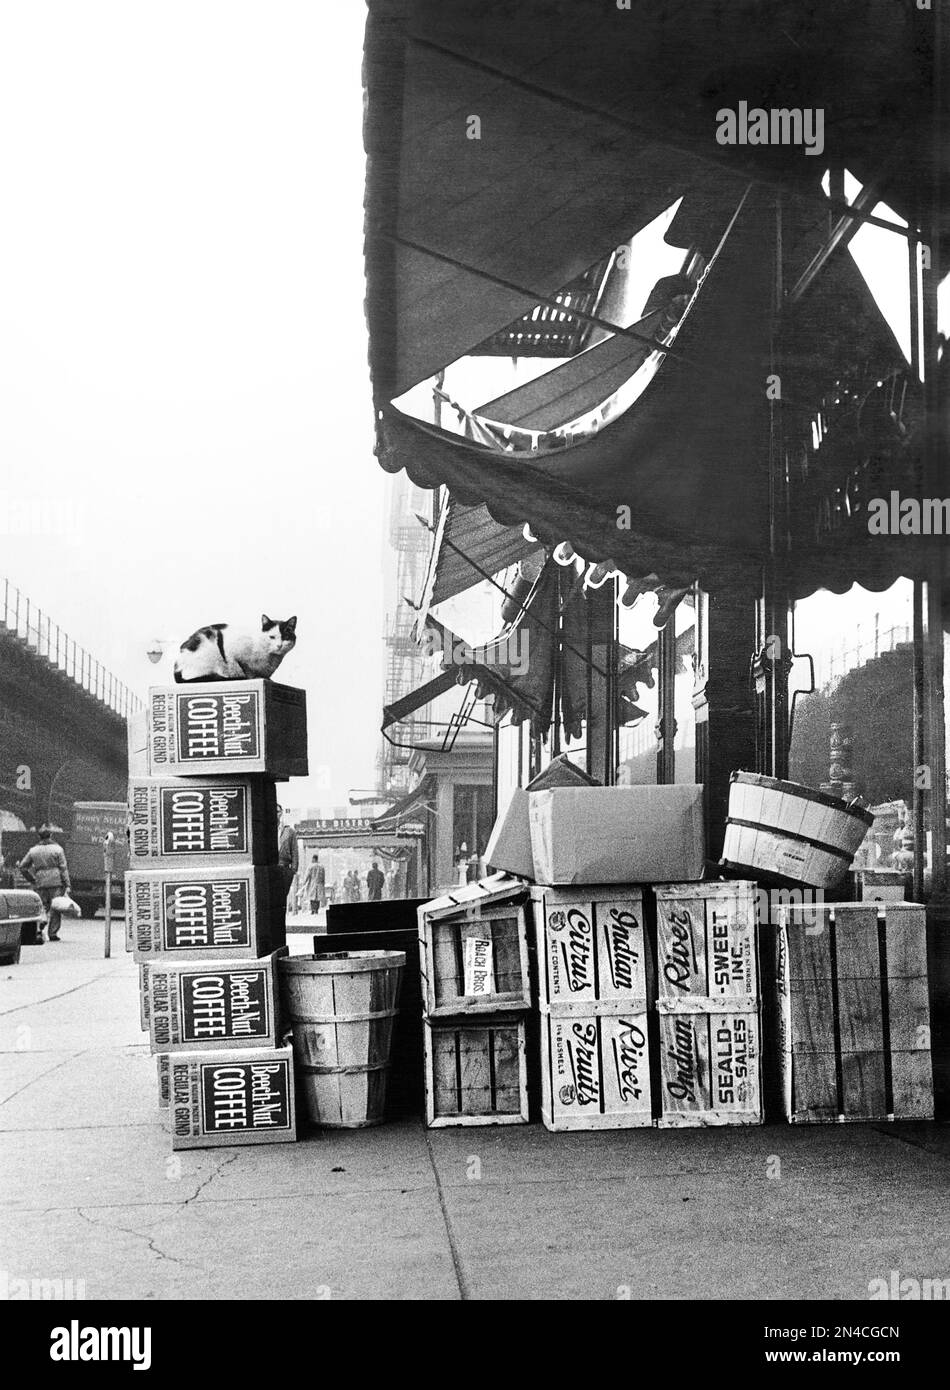 Cat sitting atop Boxes of Beech-Nut Coffee amongst other Crates on Sidewalk, New York City, New York, USA, Angelo Rizzuto, Anthony Angel Collection, April 1955 Stock Photo